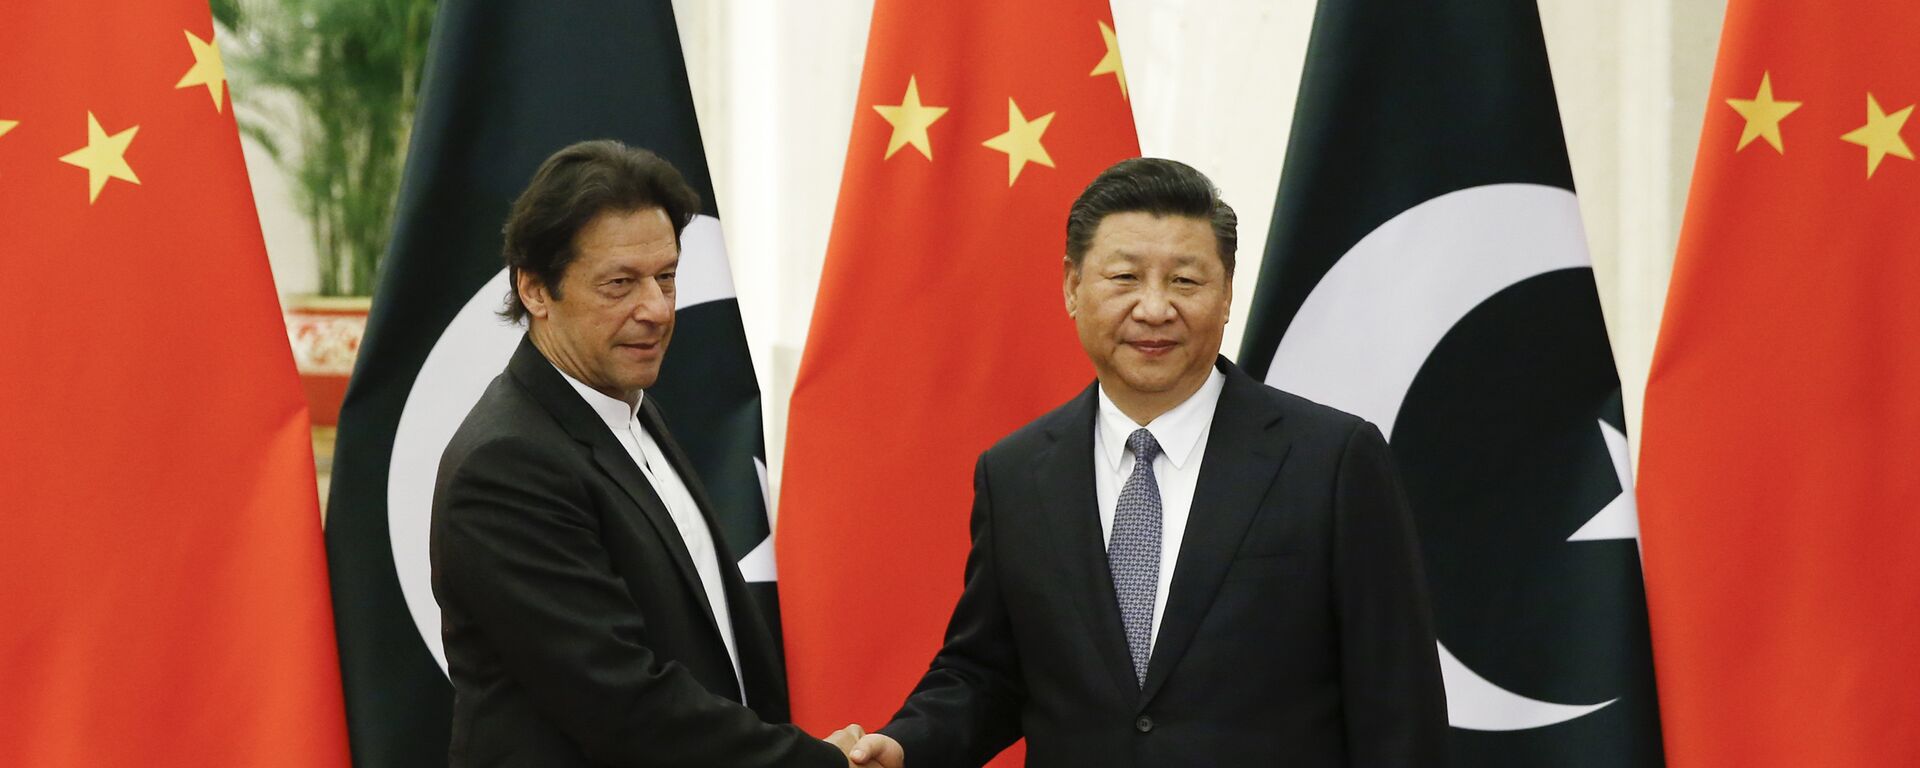 China's President Xi Jinping, right, meets Pakistan's Prime Minister Imran Khan at the Great Hall of the People in Beijing, Friday, Nov. 2, 2018 - Sputnik International, 1920, 20.05.2019